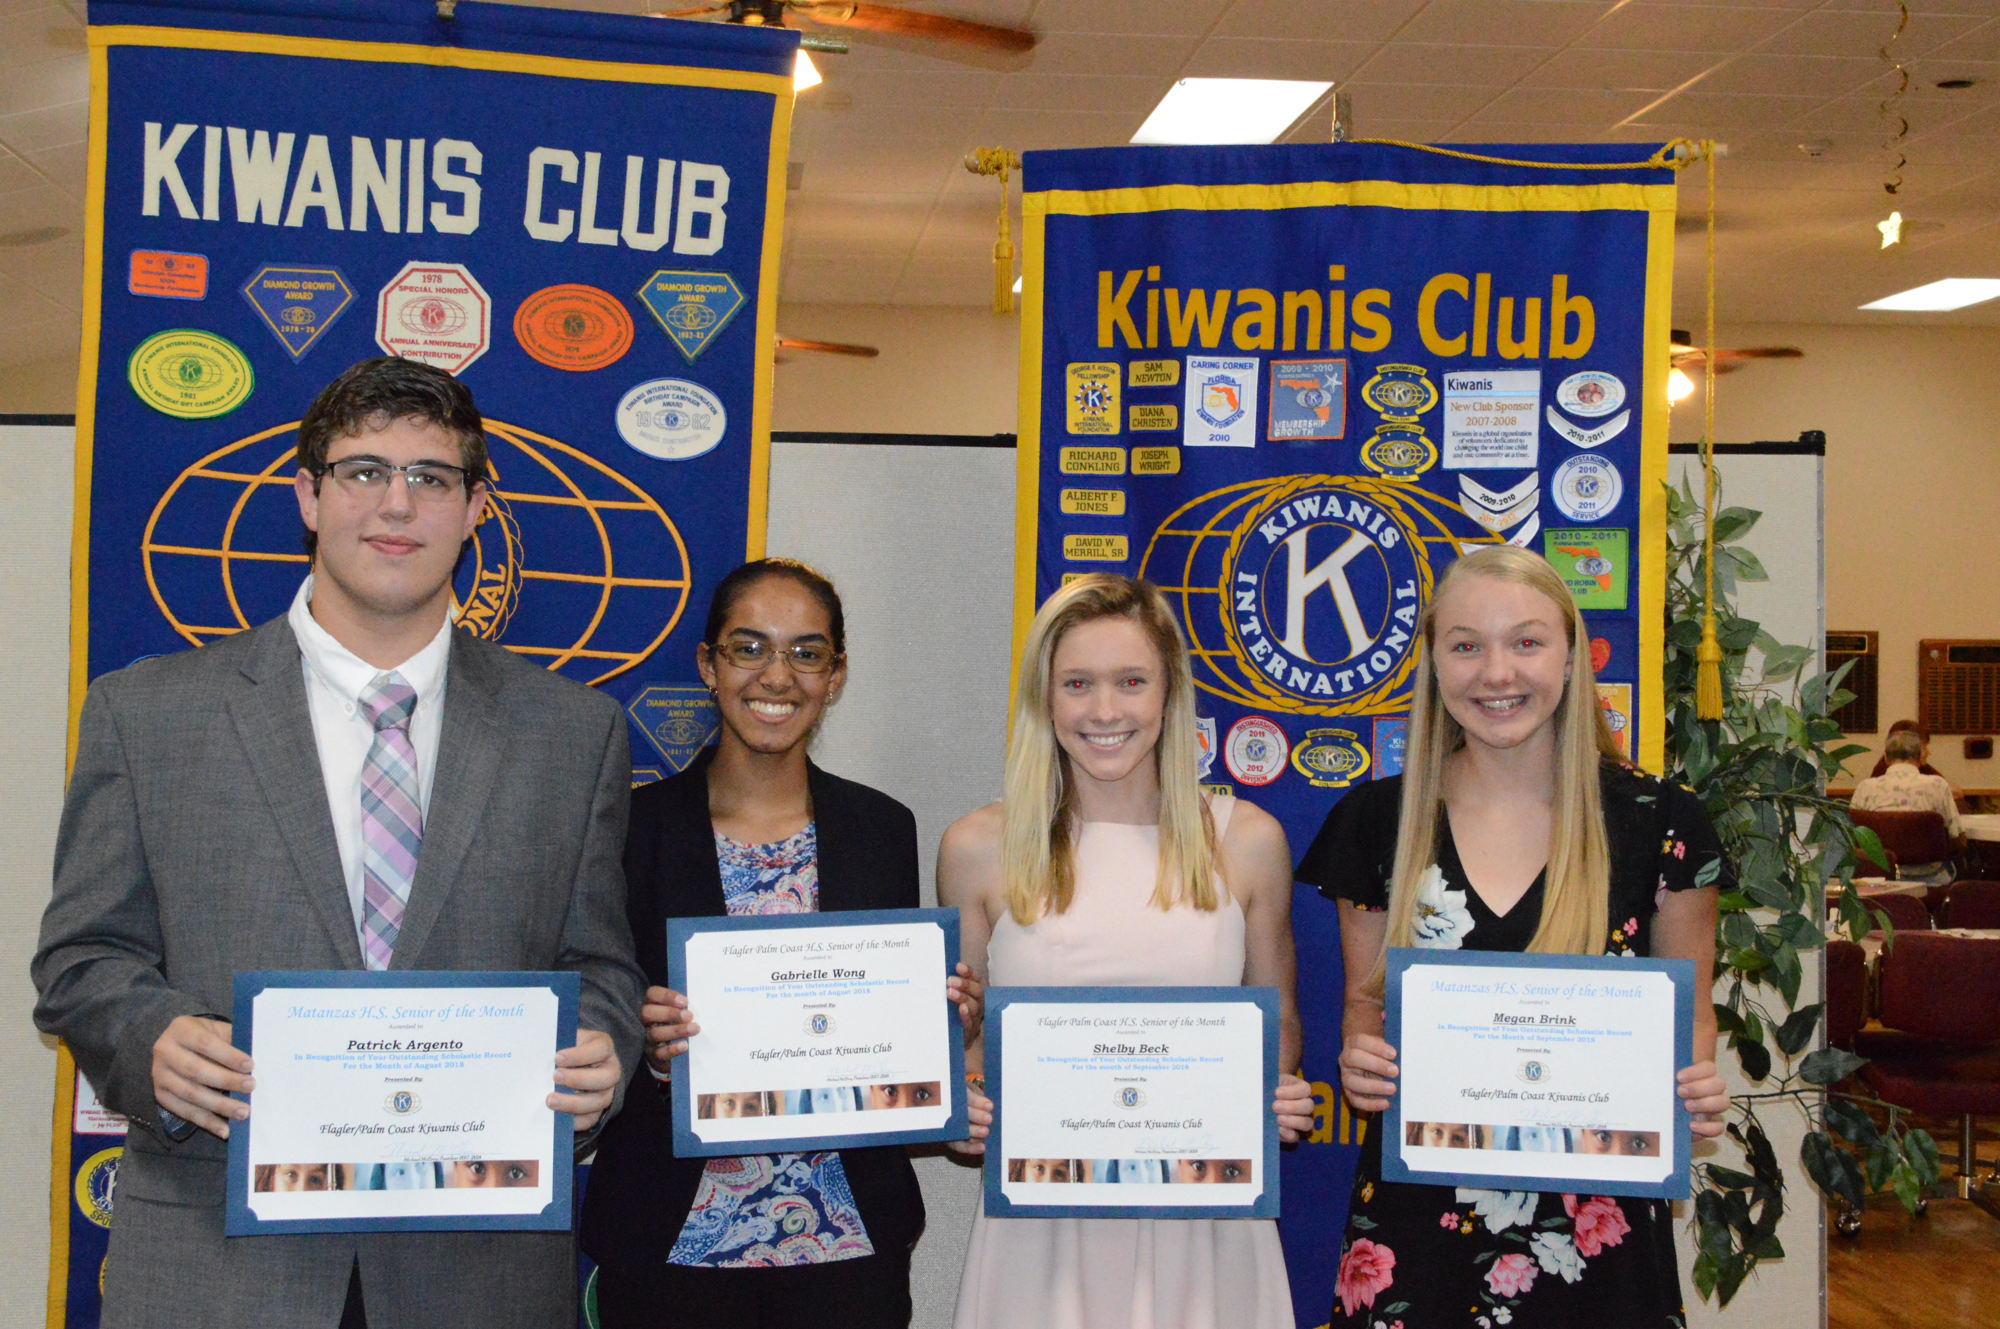 Kiwanis Club seniors of the month for August: Patrick Argento and Gabrielle Wong, and for September: Shelby Beck and Megan Brink. Photo courtesy of Richard Conkling